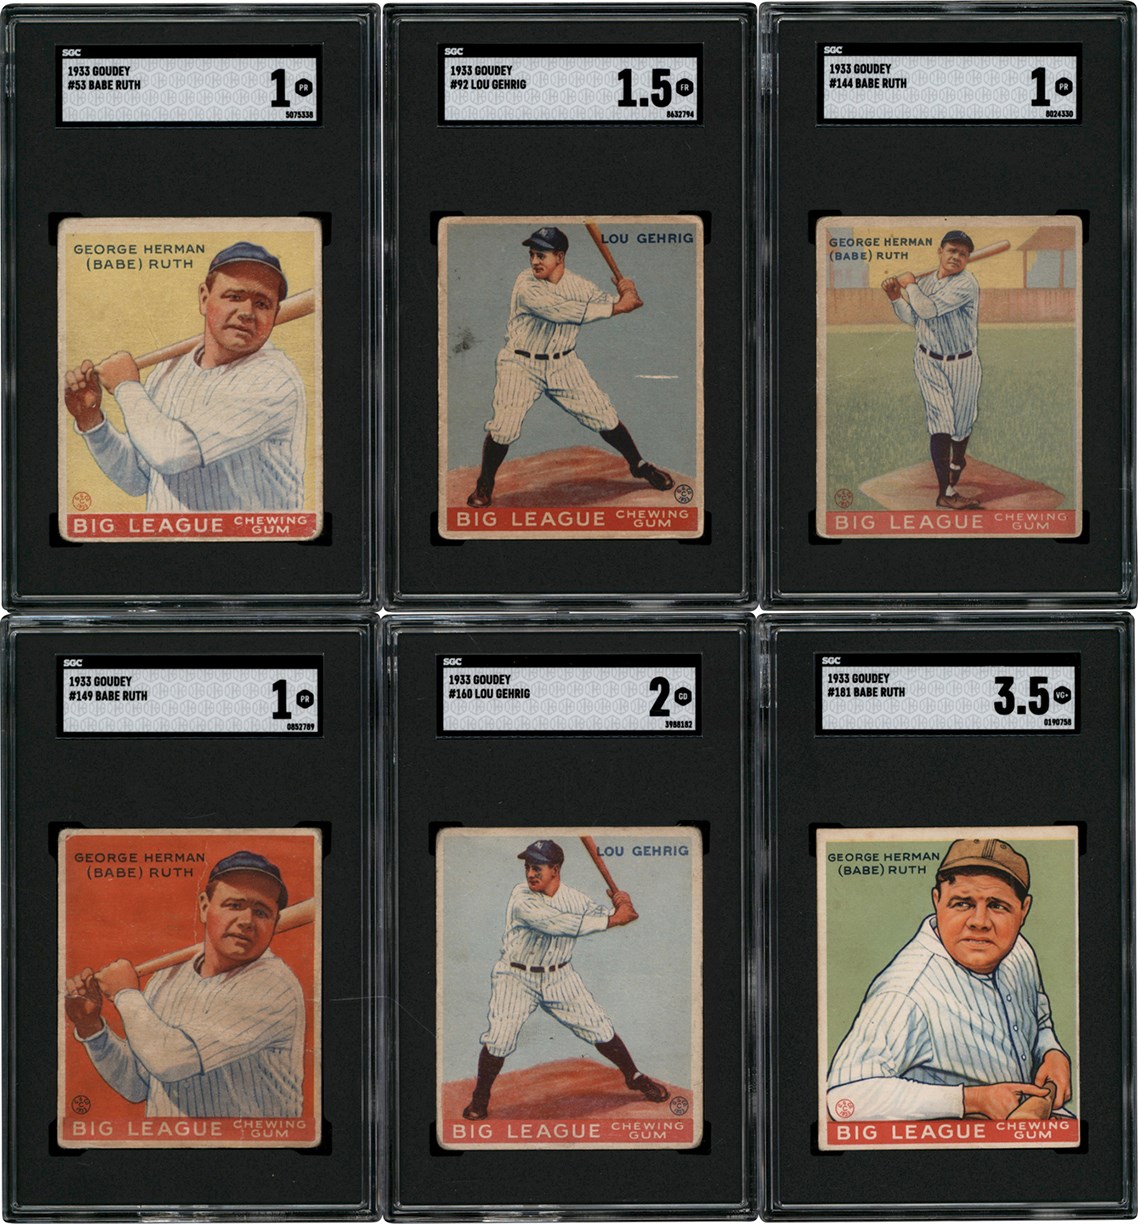 - 933 Goudey Baseball Near-Complete Set (239/240) w/All Ruth & Gehrig Cards